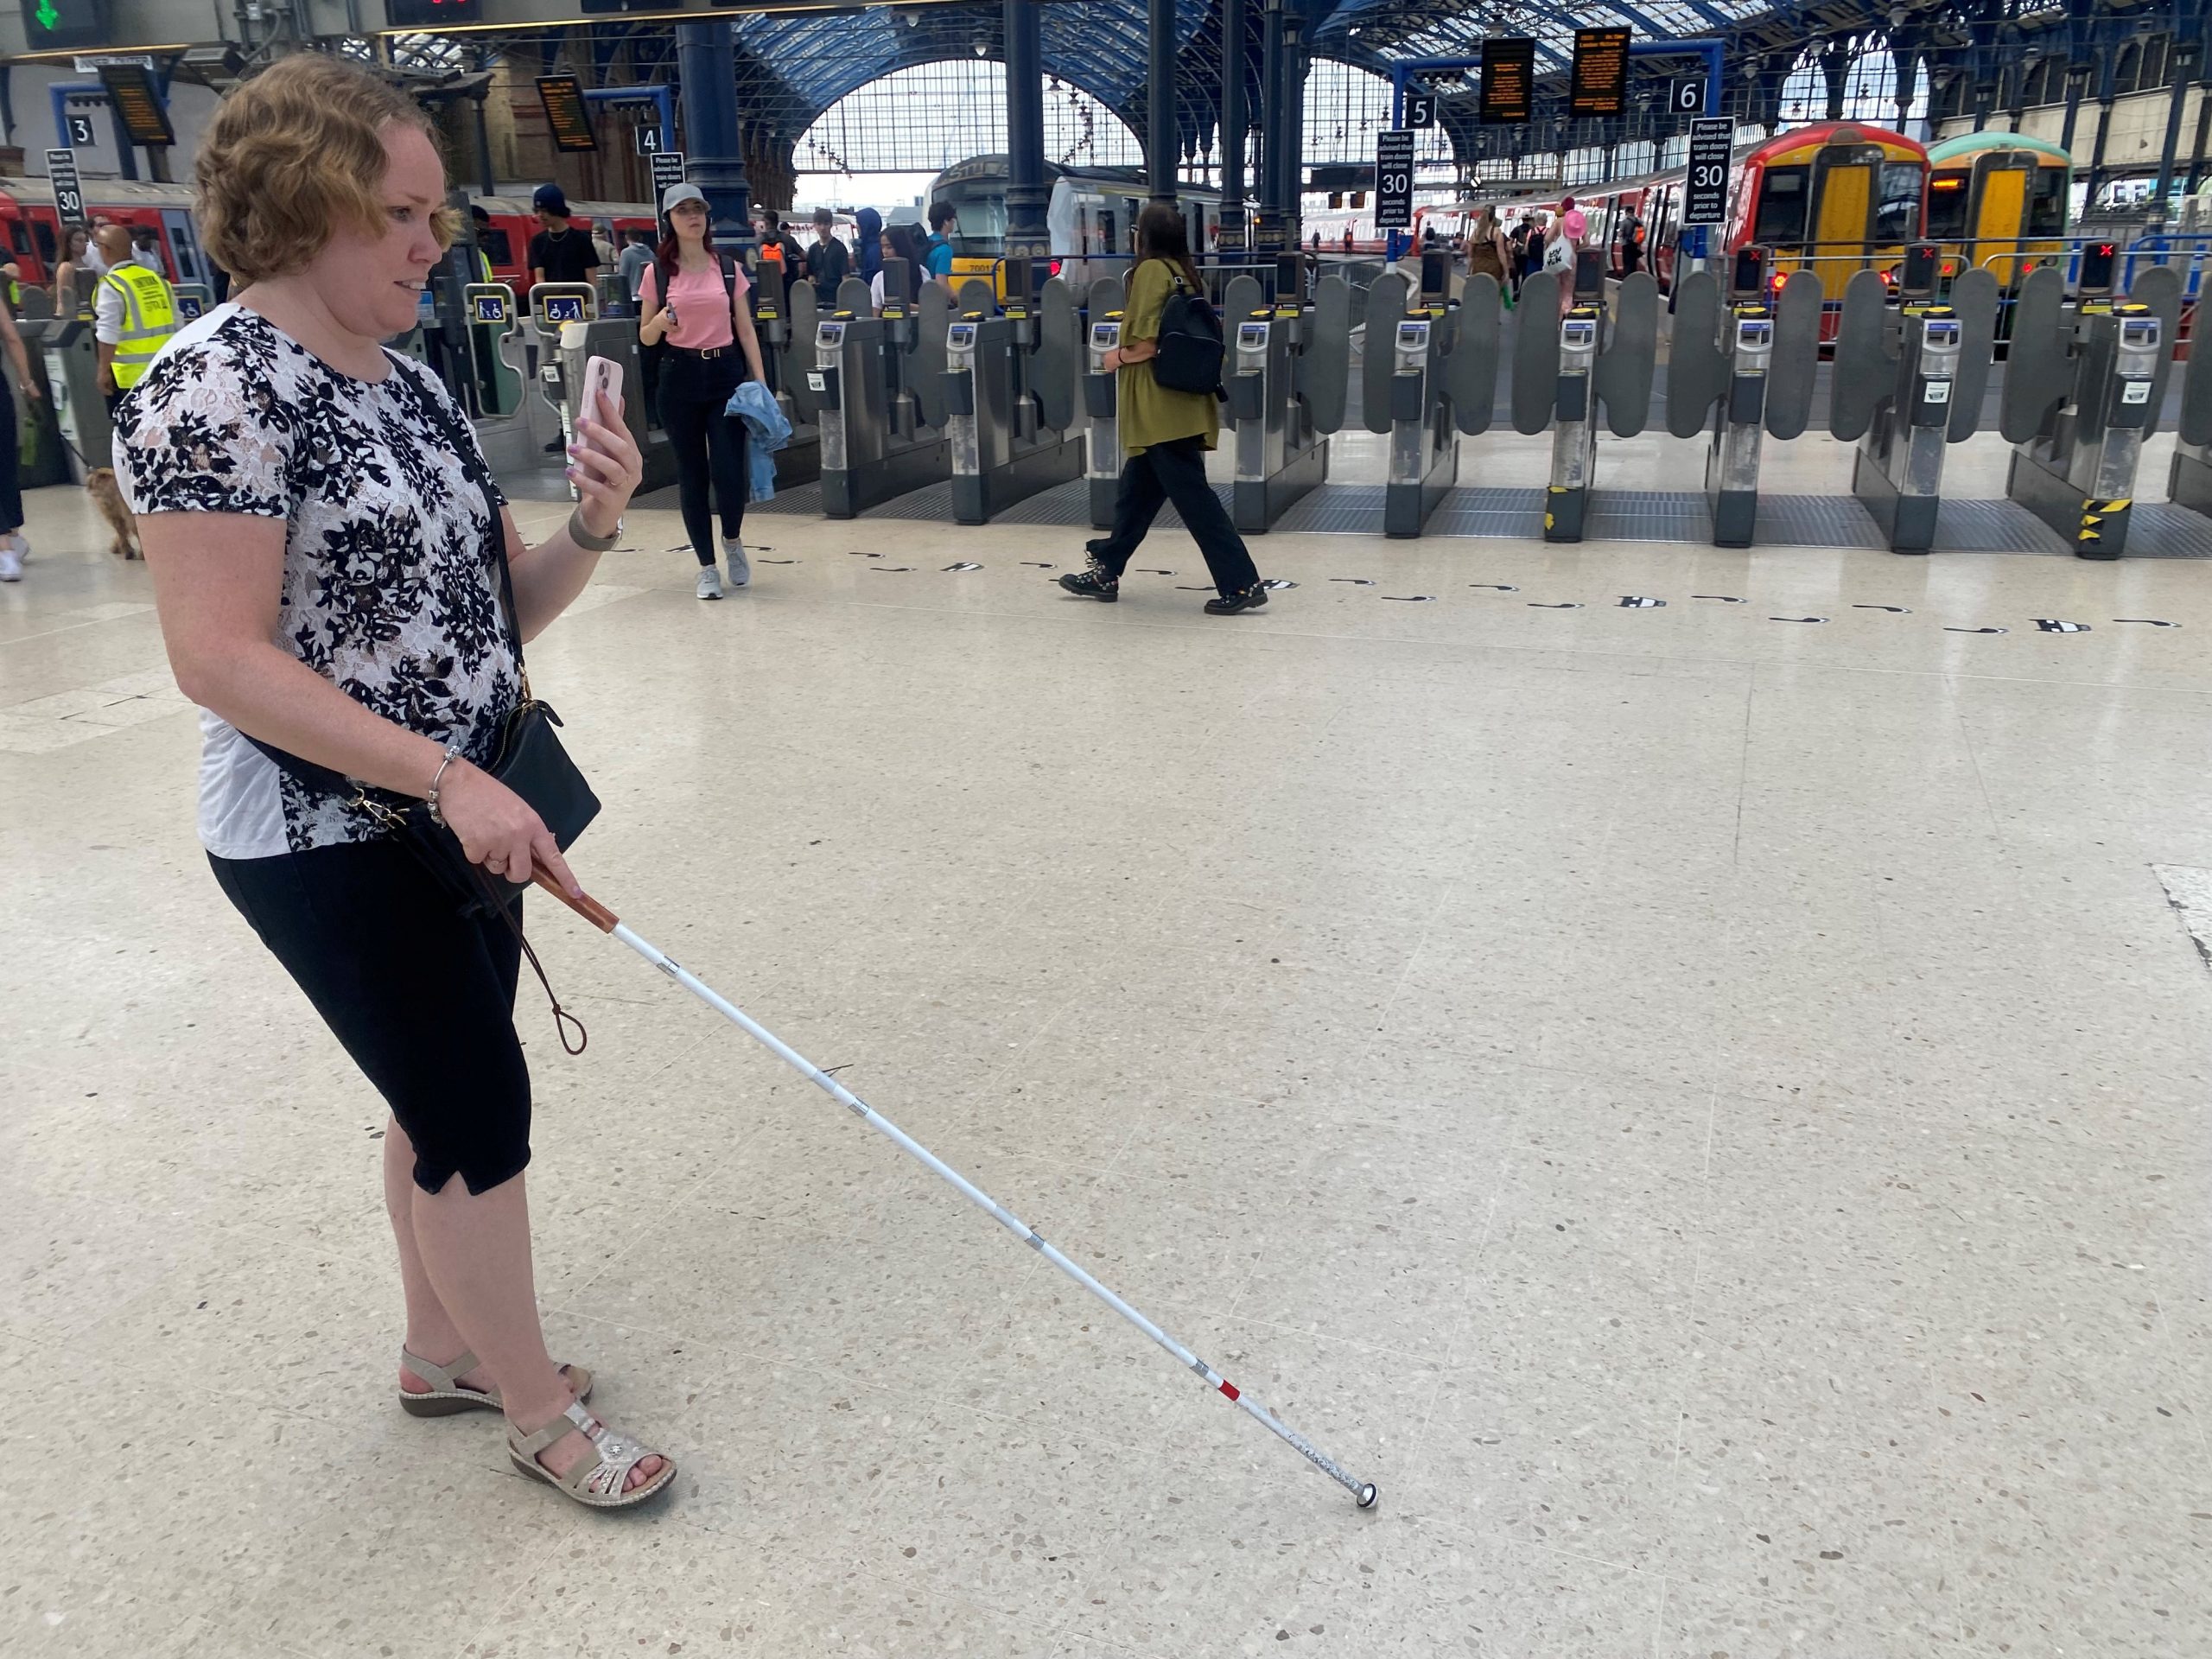 East Sussex SLC member, Linn, is being guided through Brighton train station whilst using the Aira app. The ticket barriers to the platforms are shown in the background.